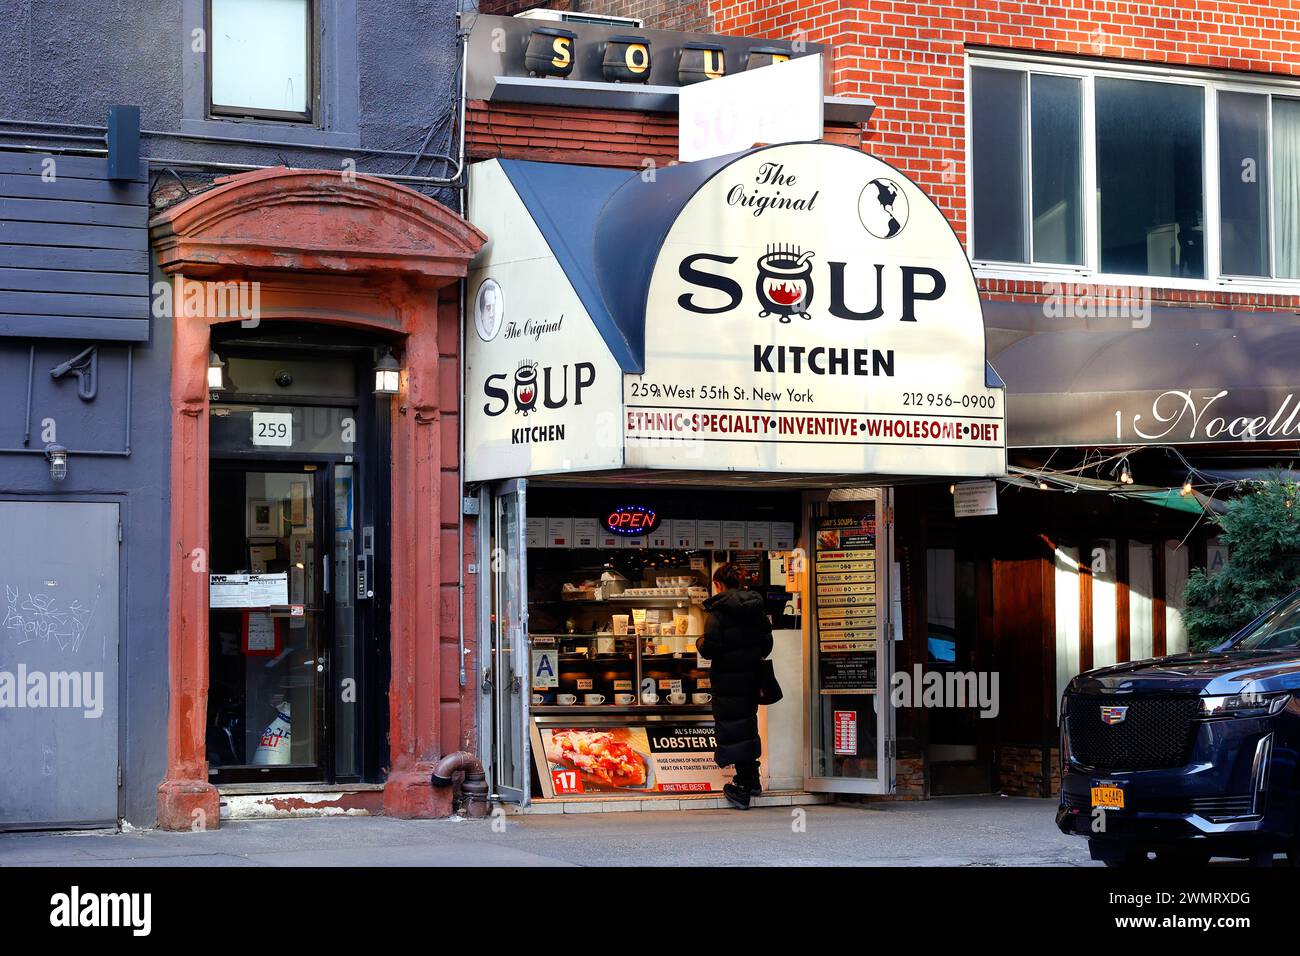 The Original Soup Kitchen, 259A W 55th St, New York, NYC storefront of a soup takeout spot in Midtown Manhattan. Stock Photo